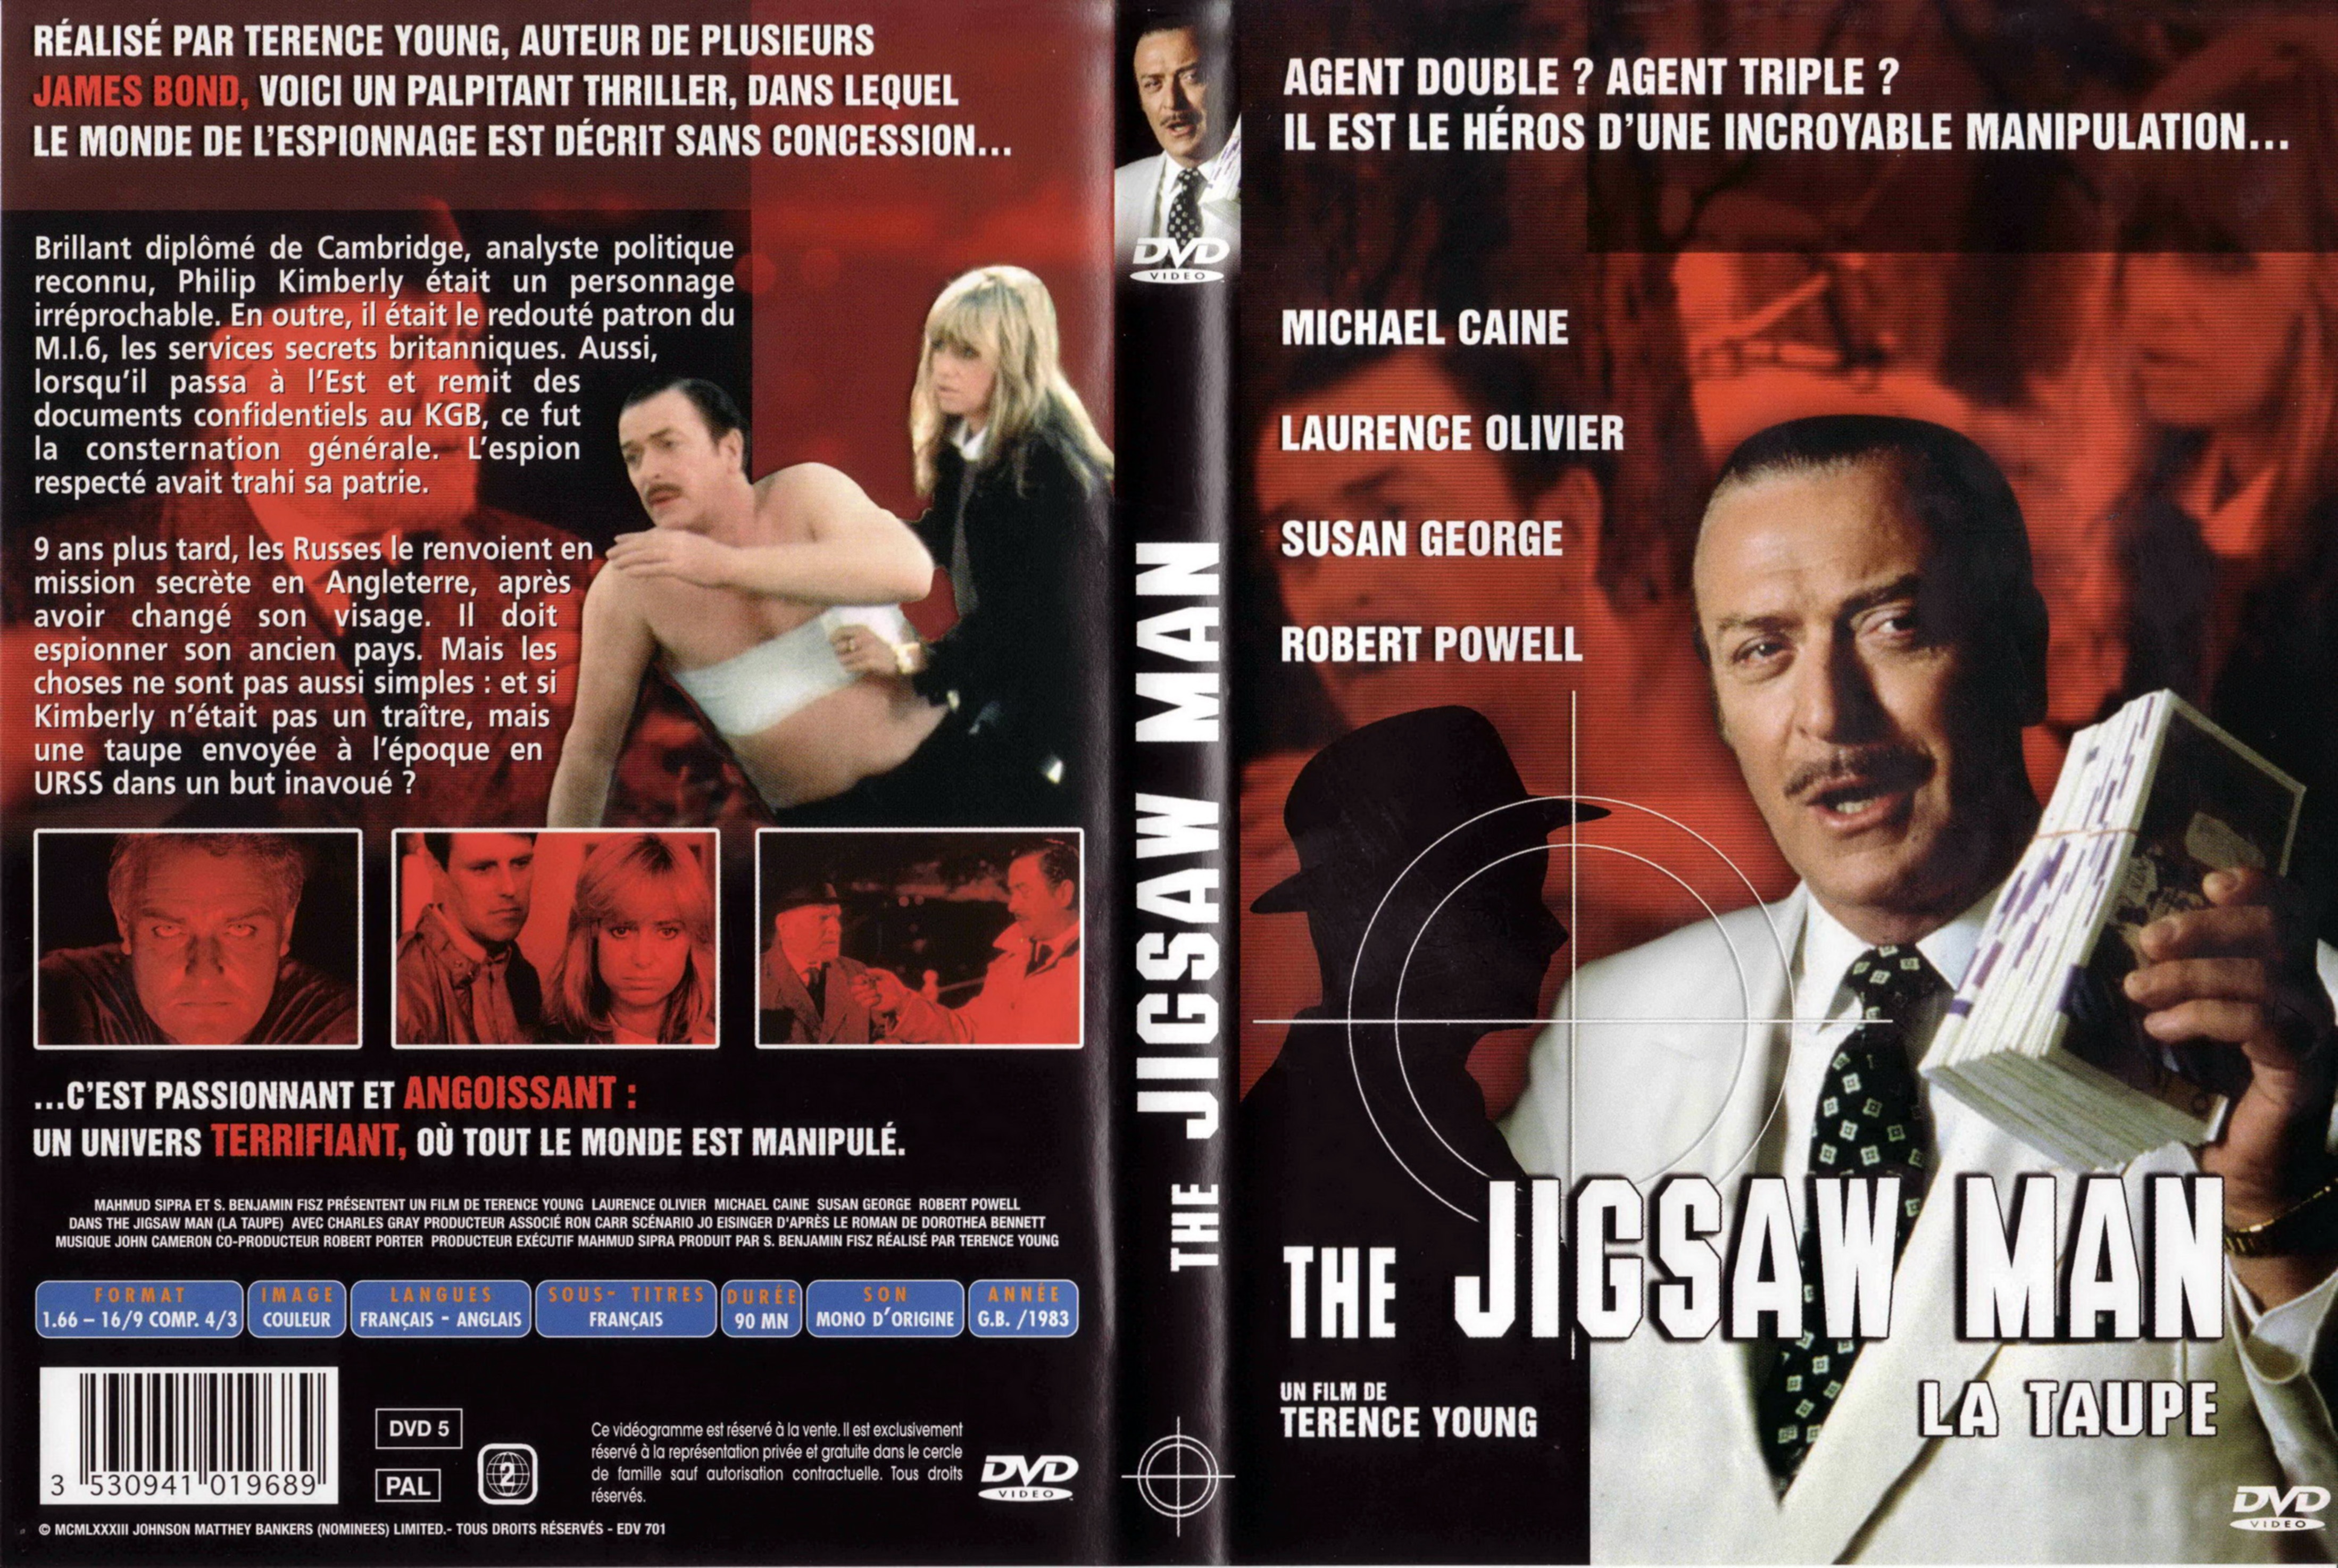 Jaquette DVD The jigsaw man - La taupe